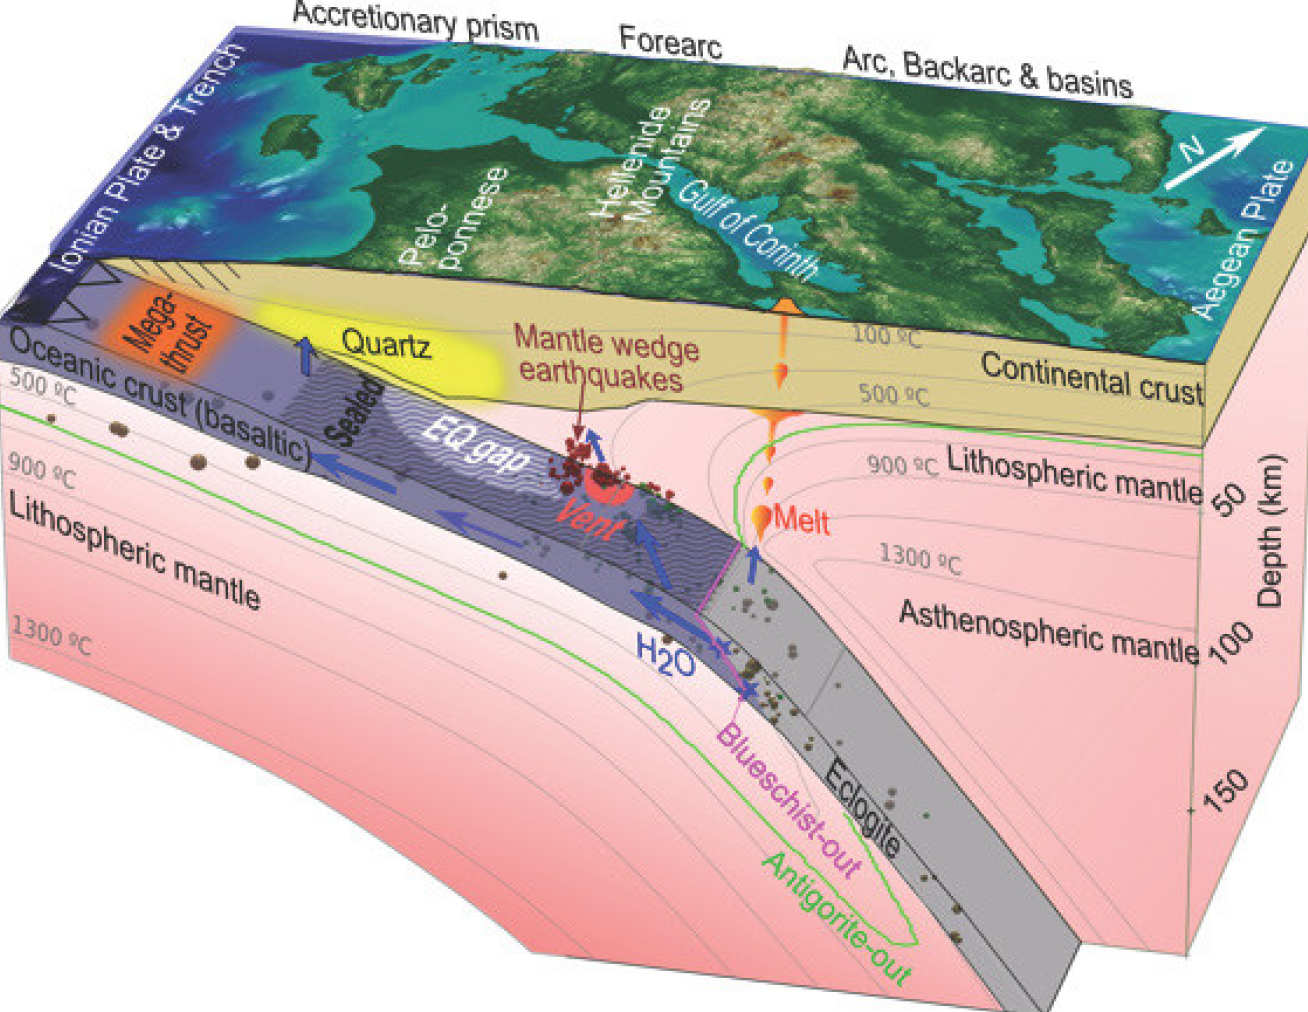 Schematic showing fluid migration paths between the sources and sinks of water in the Hellenic subduction zone.